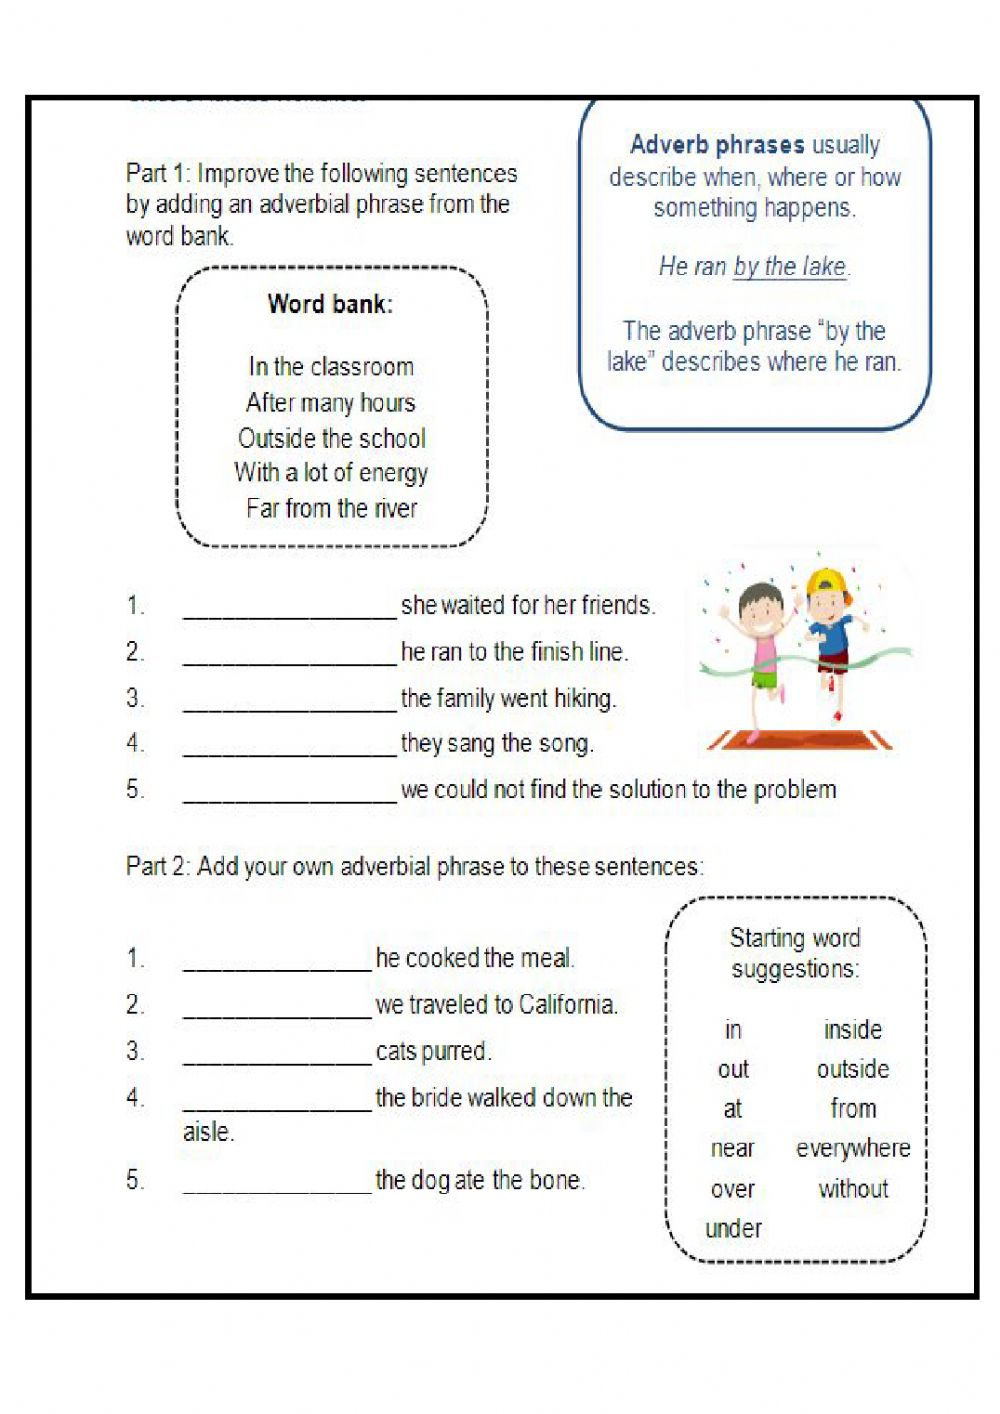 adjective-and-adverb-phrases-worksheet-with-answers-pdf-adverbworksheets